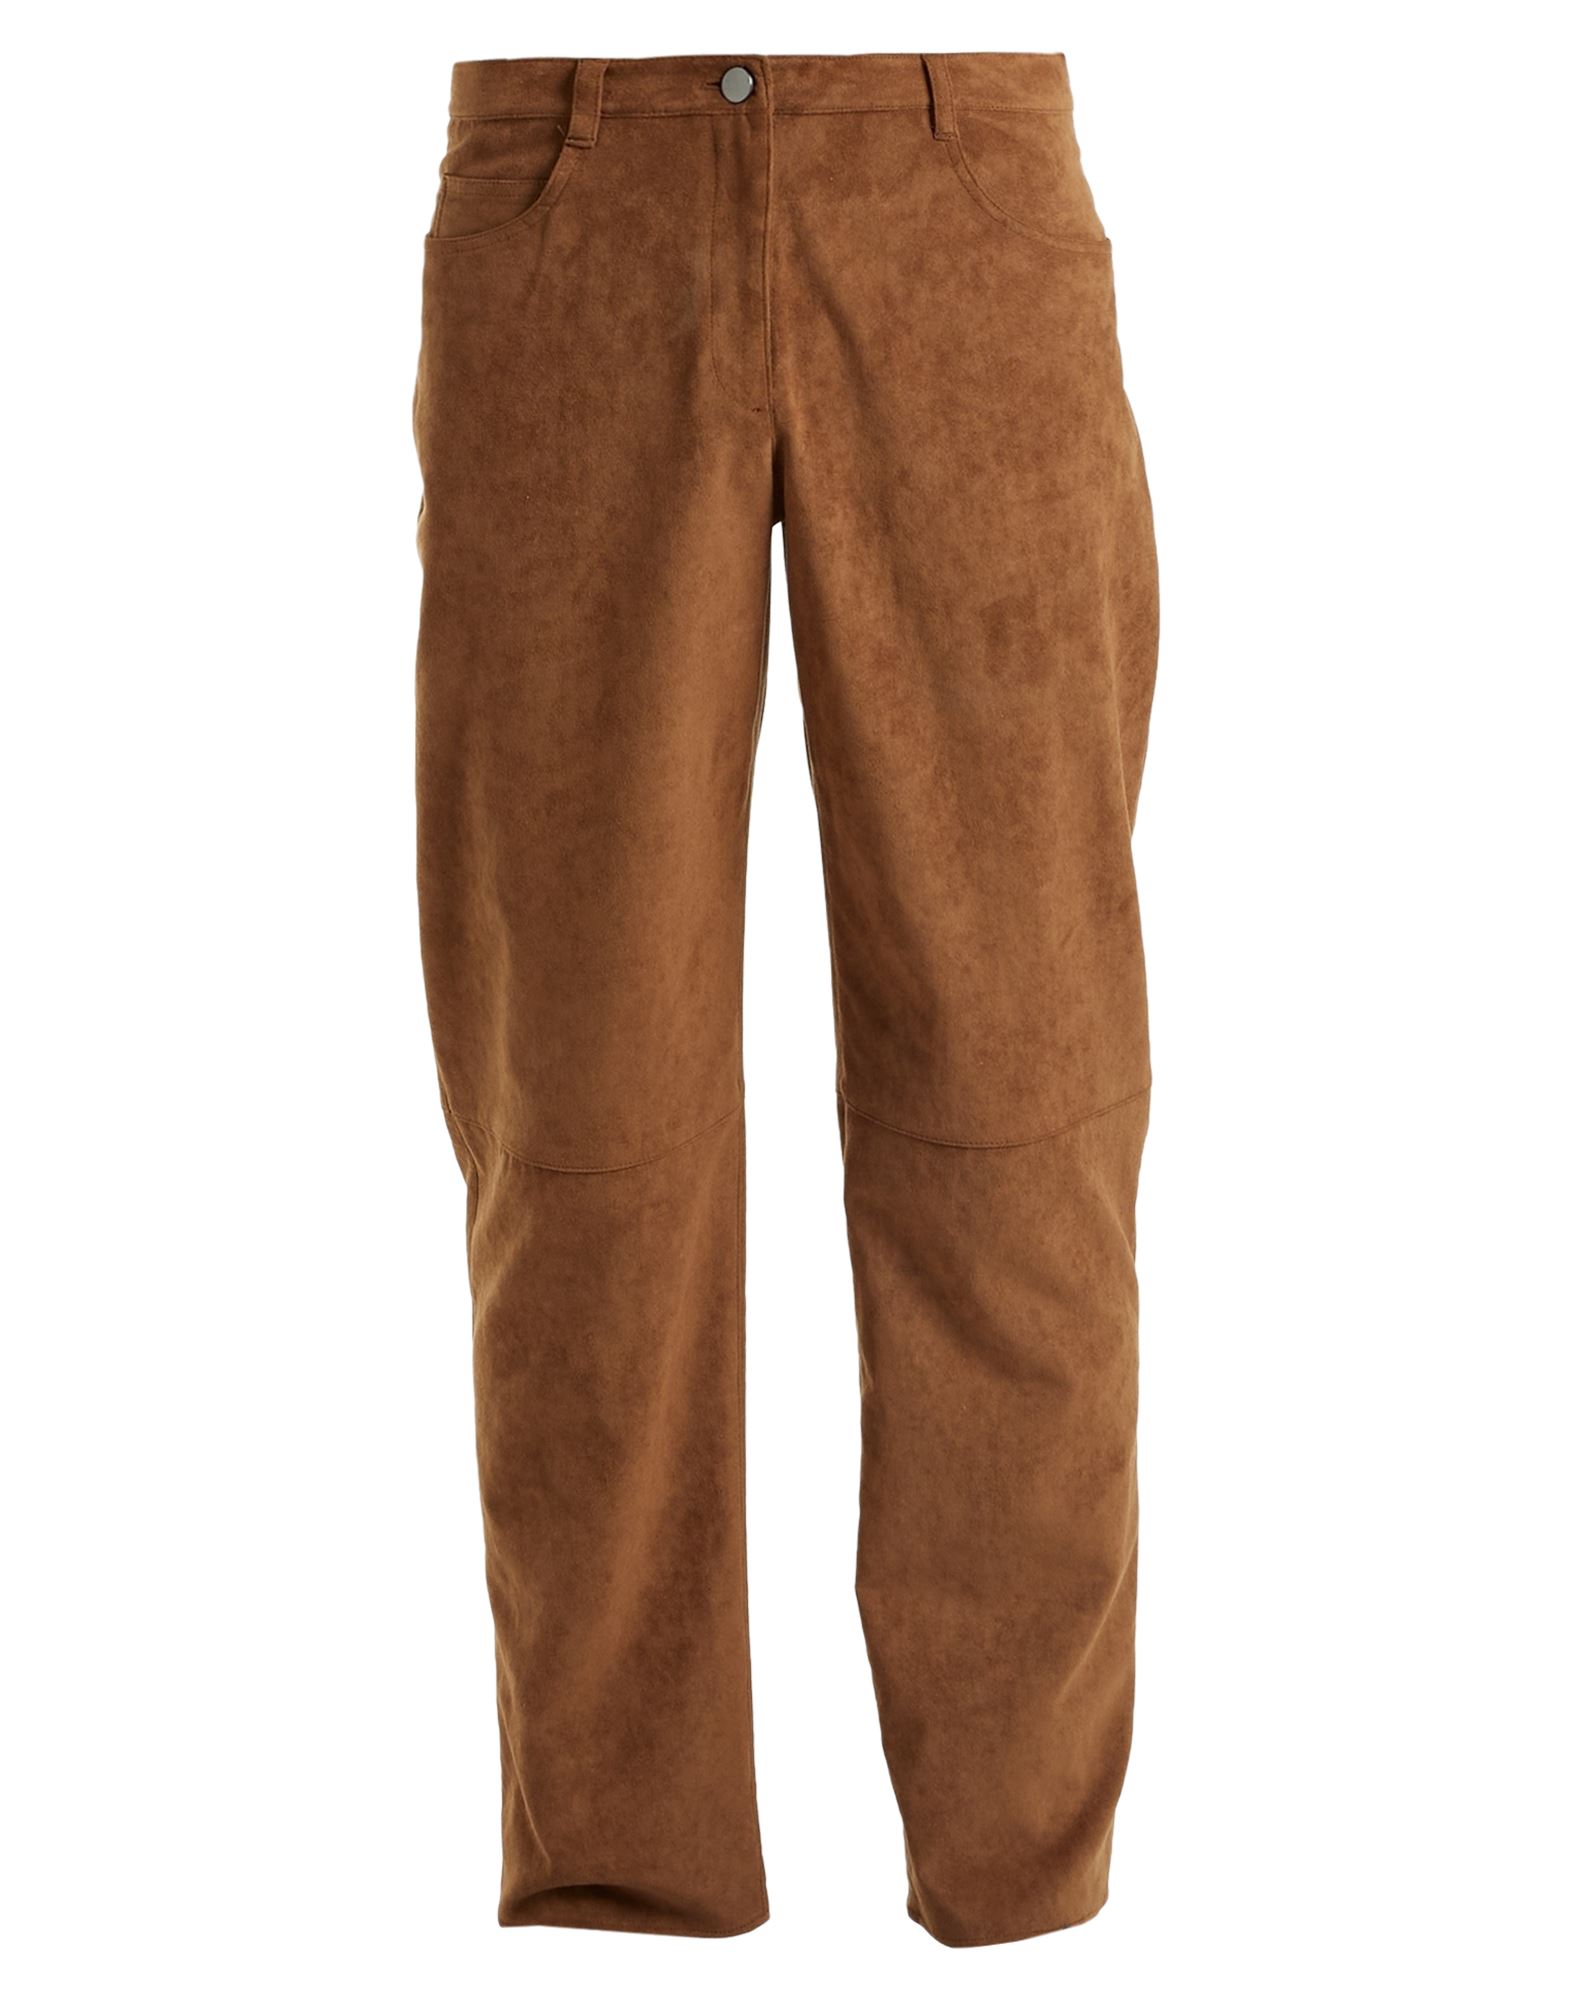 Theory Pants In Beige